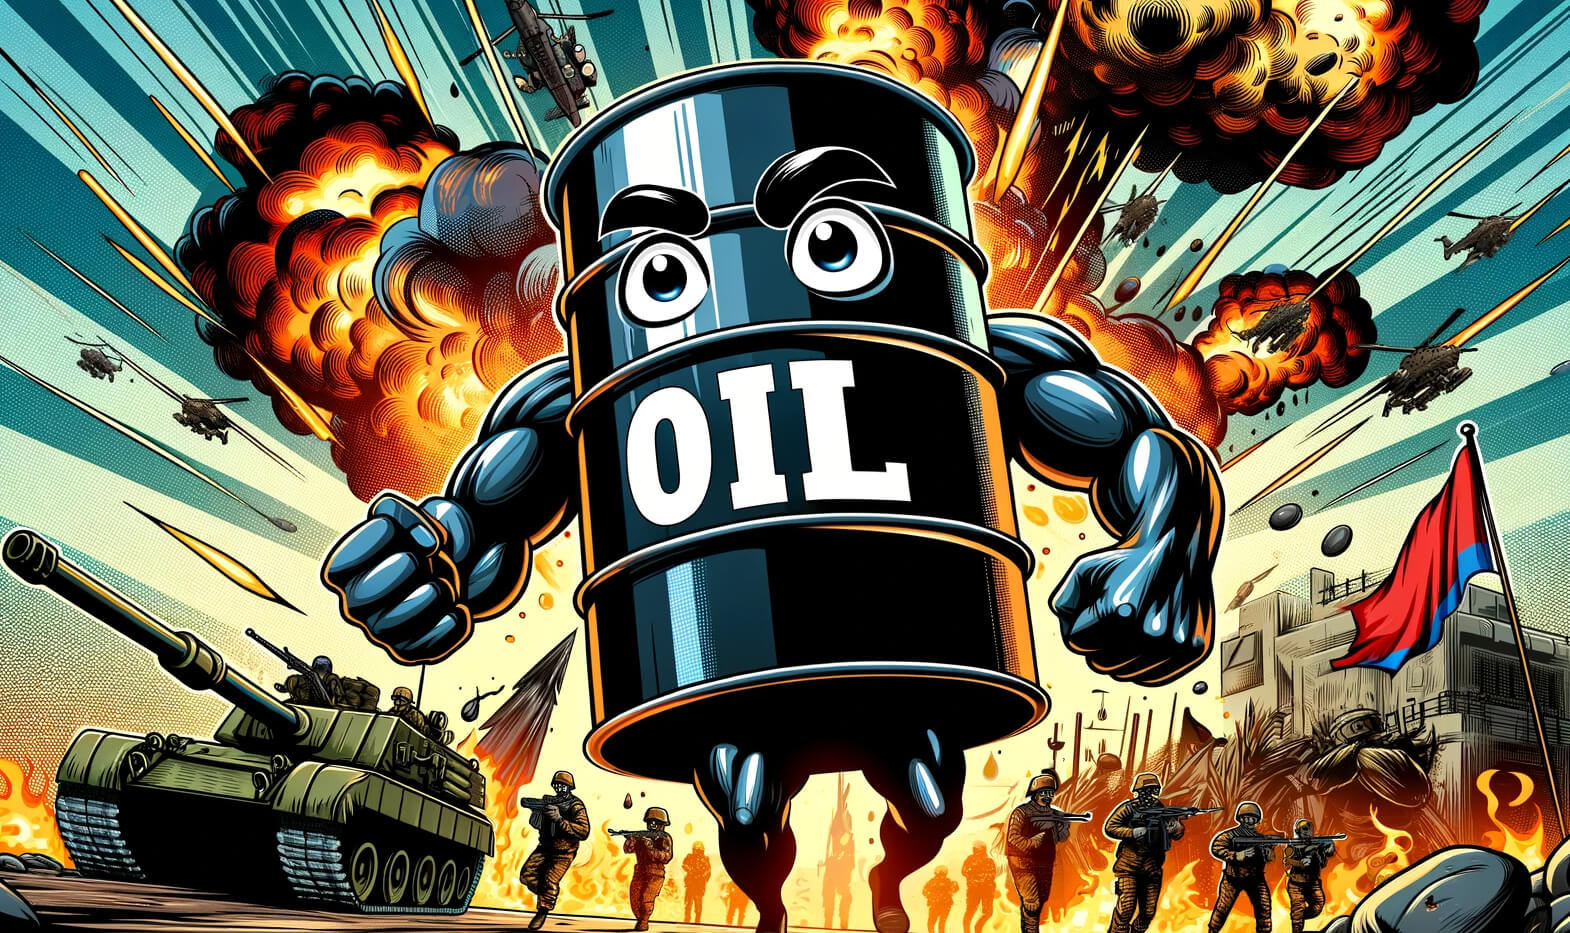 Oil Market - The Israel-Hamas Conflict and Its Global Impact